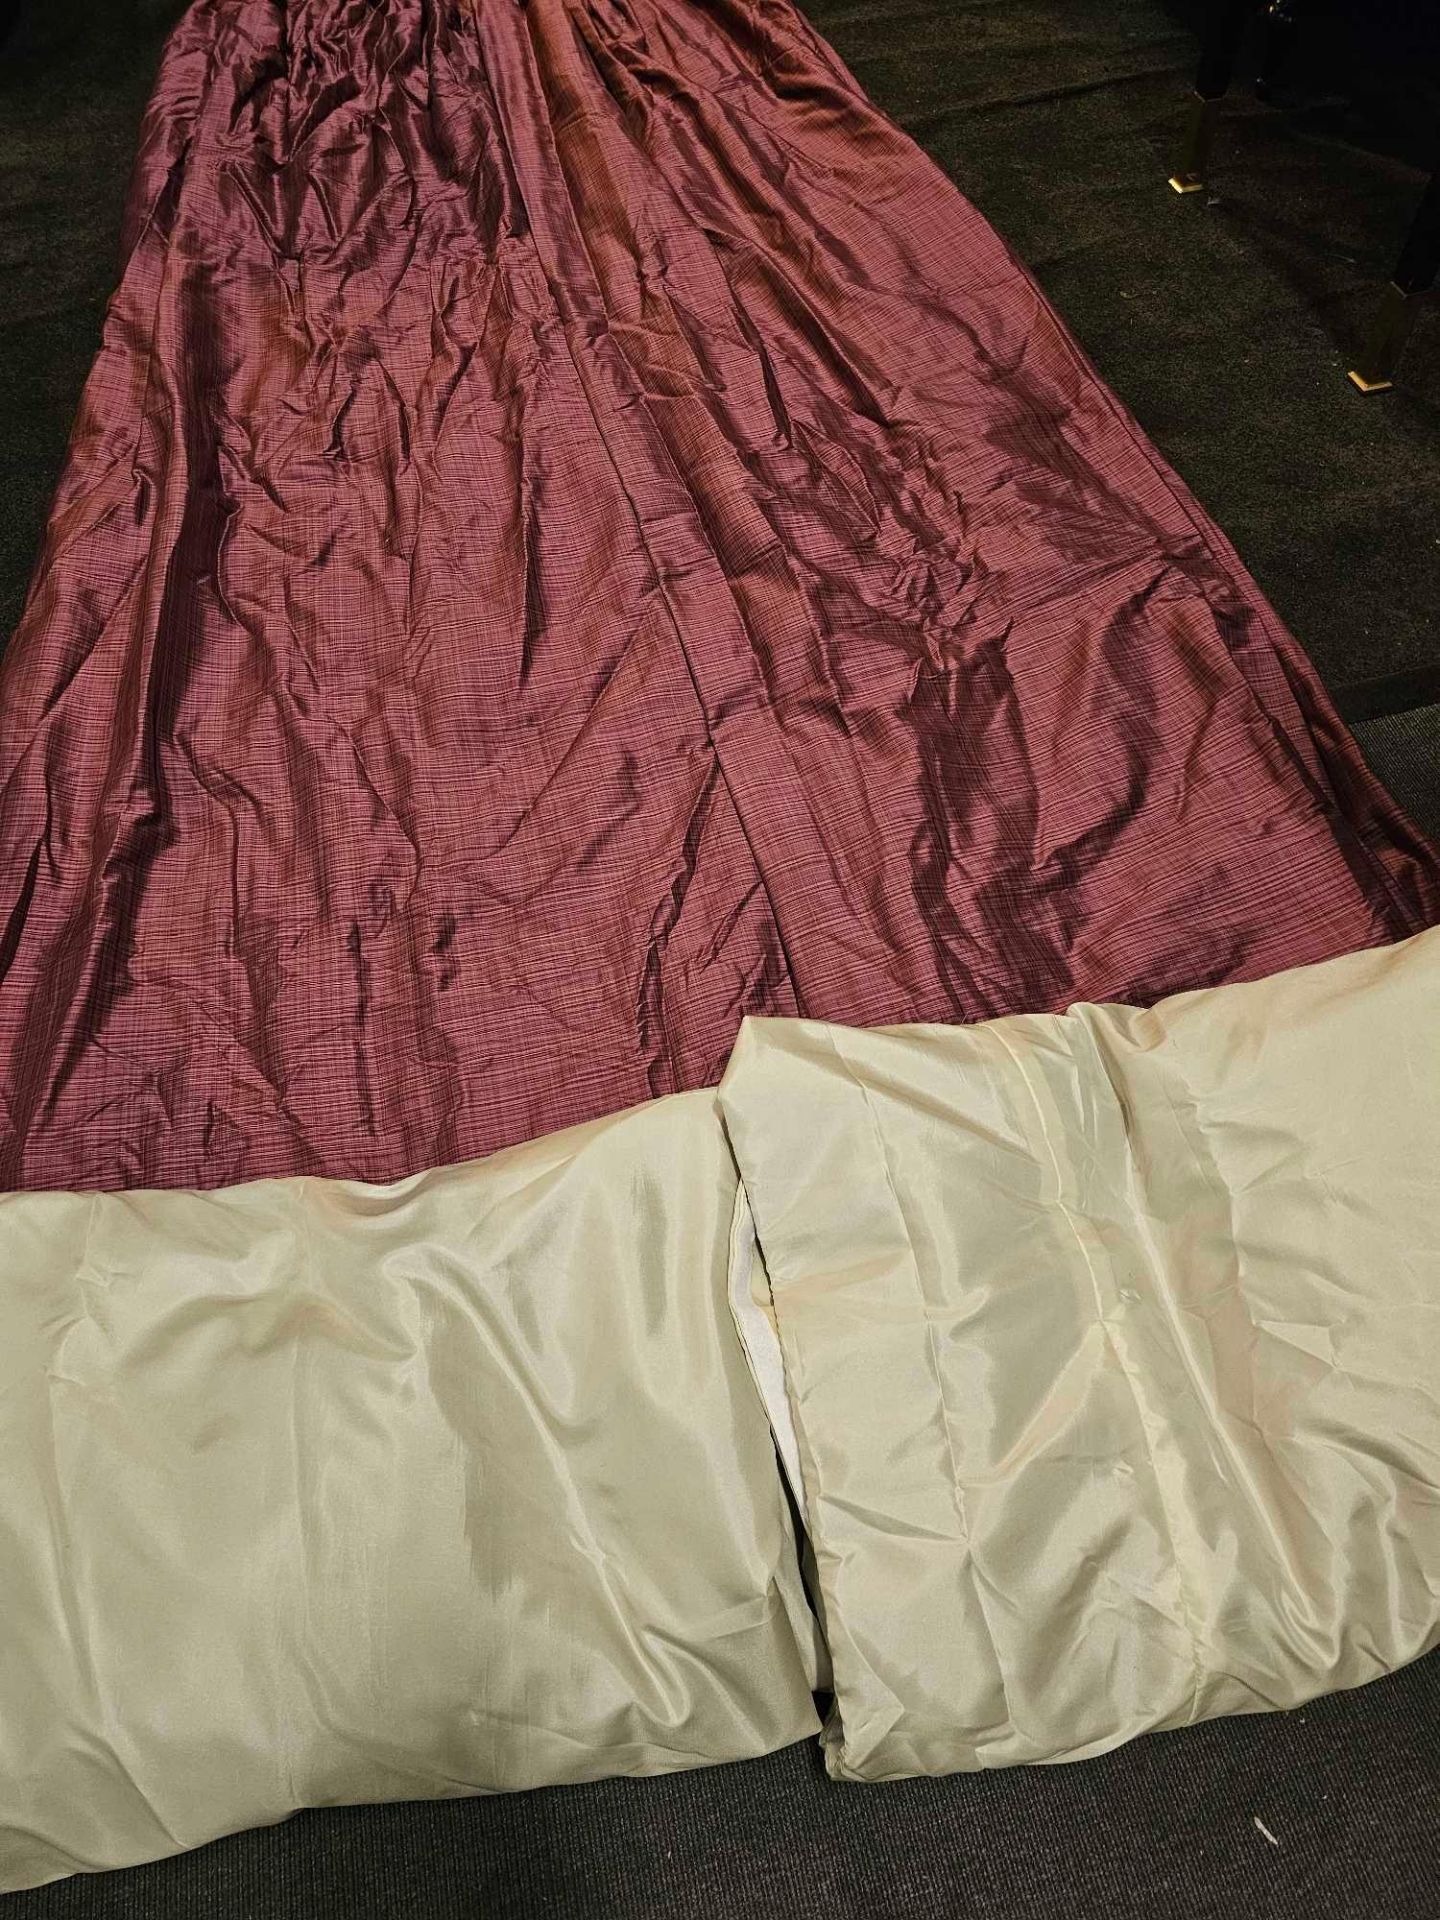 A Pair of Wine Red Silk Feint Pattern Drapes With Cream Jabots With Trim Edge 190 x 265 (Ref : Dorch - Image 5 of 5